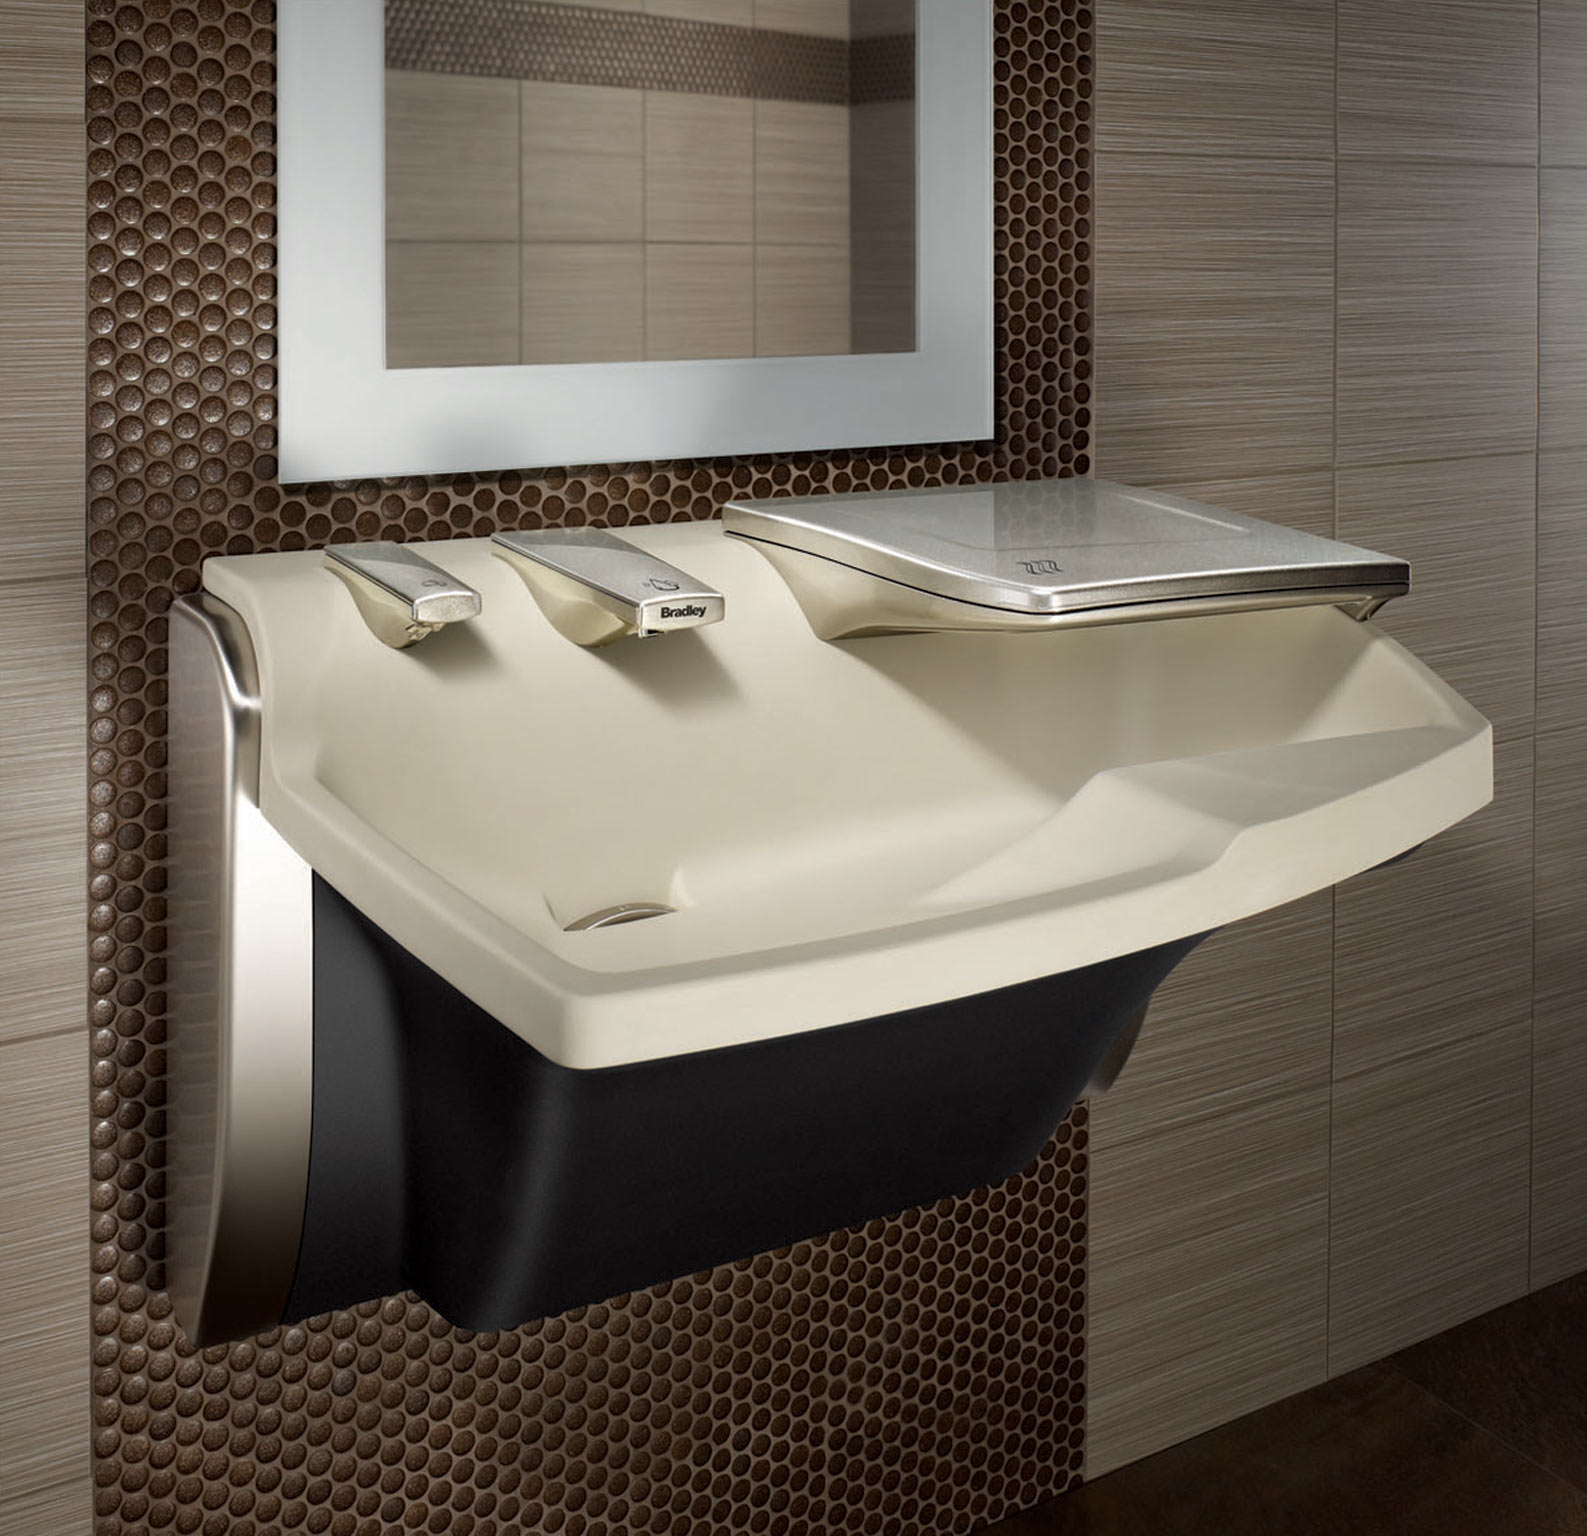 Advocate Lavatory System AV-Series combines soap, water, and hand drying into one fixture